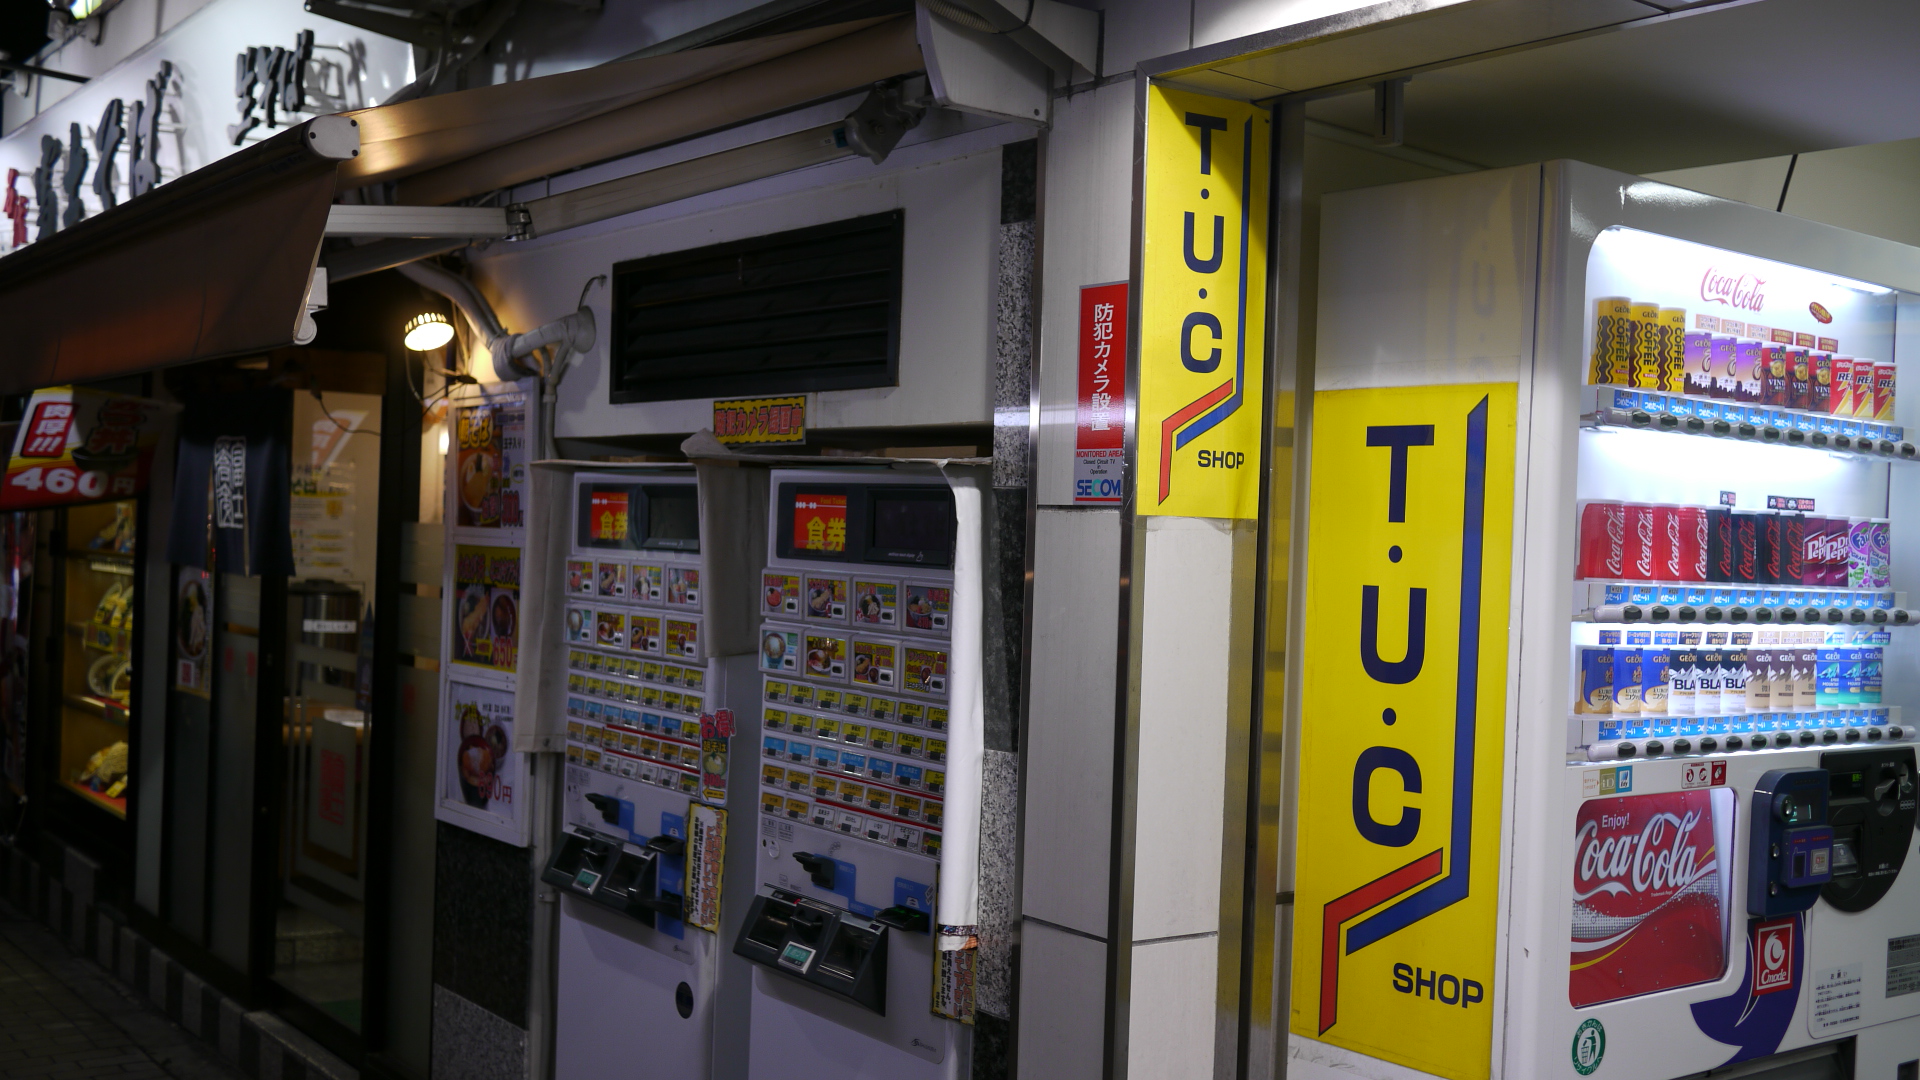 an image of a store with vending machines